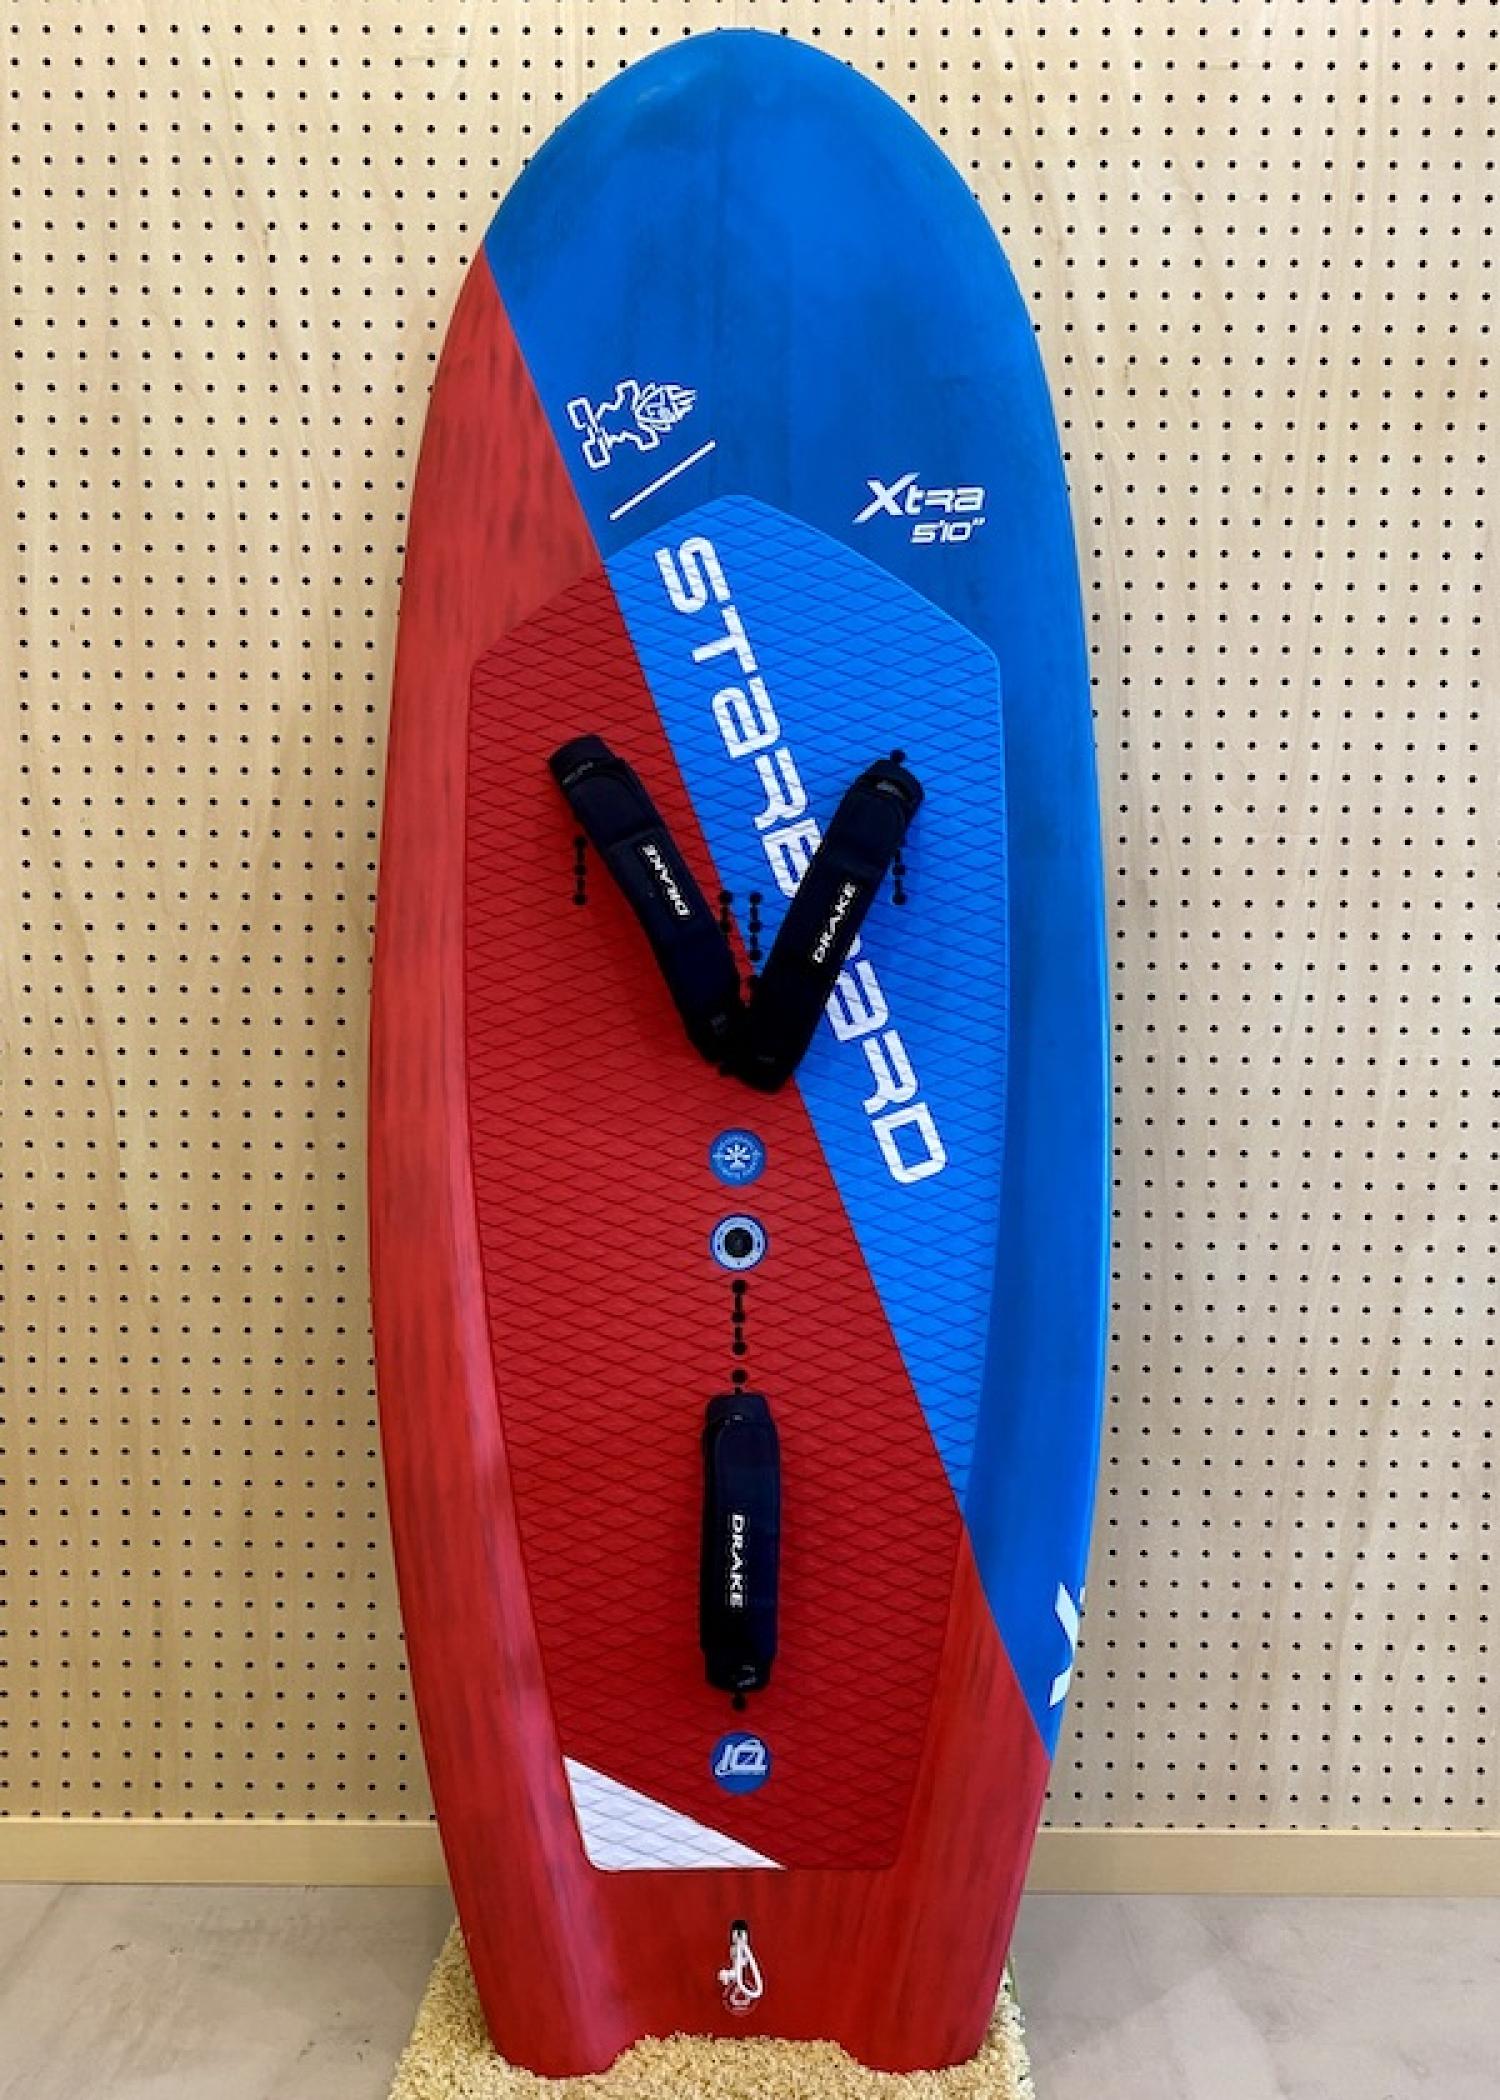 USED BOARDS (STARBOARD XTRA 5.10 Blue Carbon)